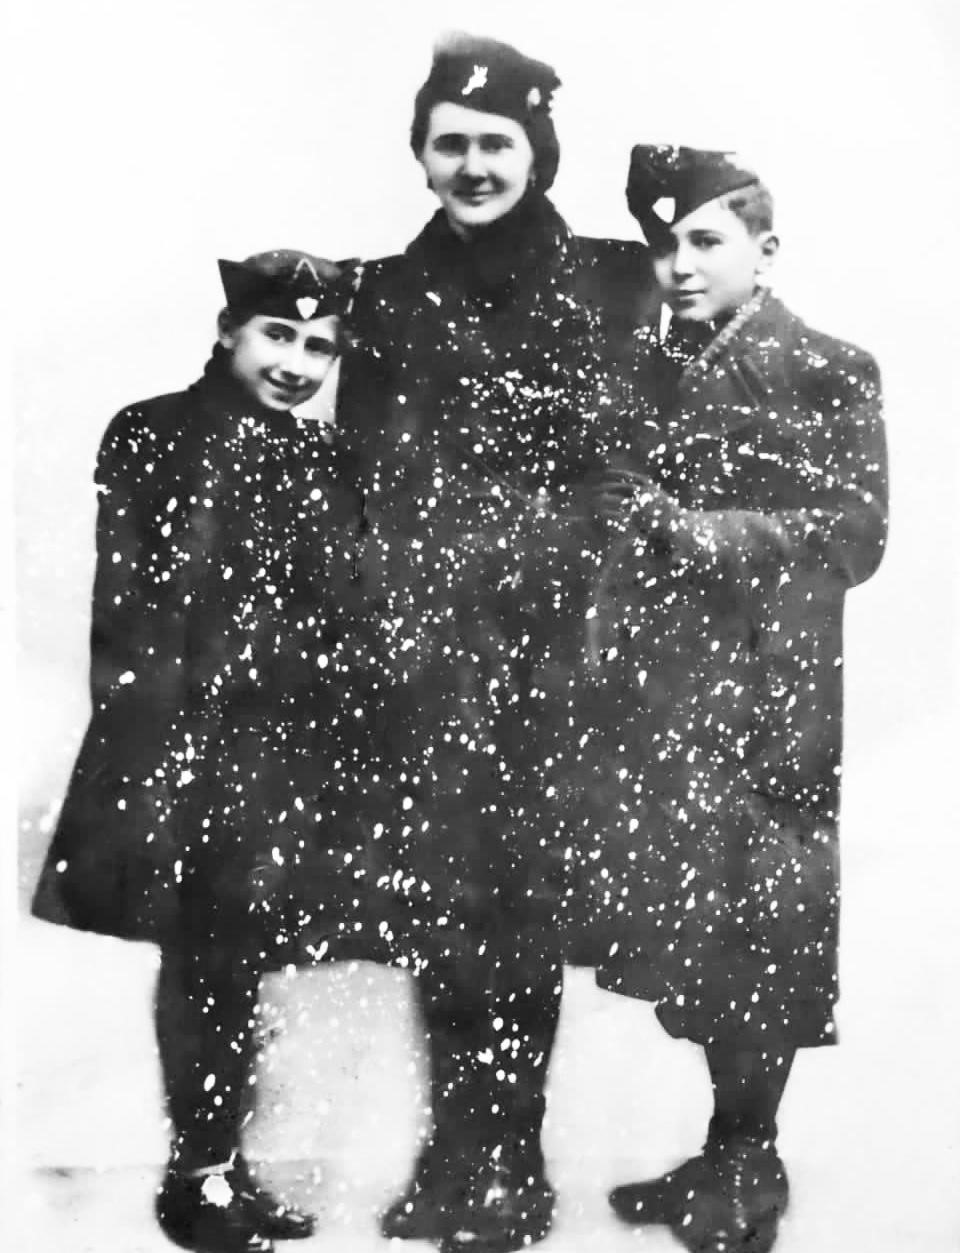 Yitzhak with his mom Rebeca and his sister Lilly before the war.